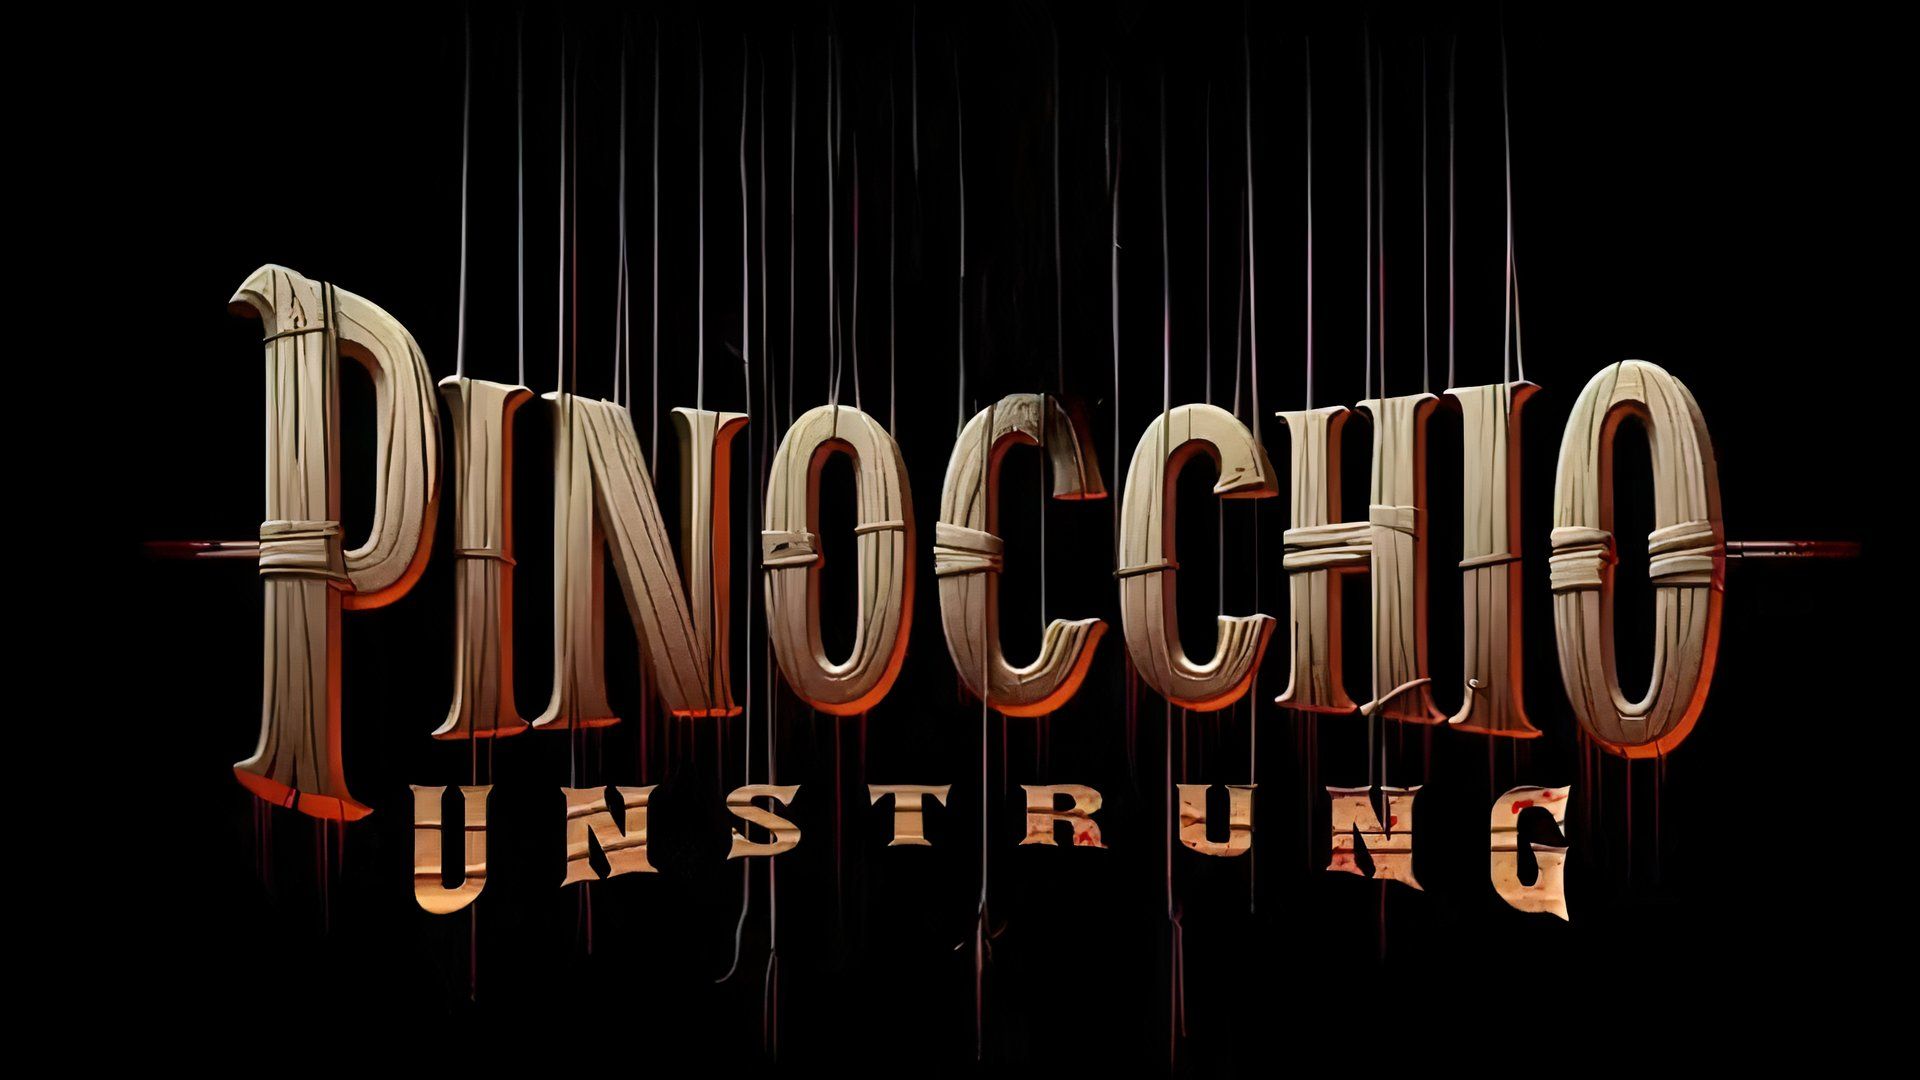 The title card for Pinocchio:Unstrung